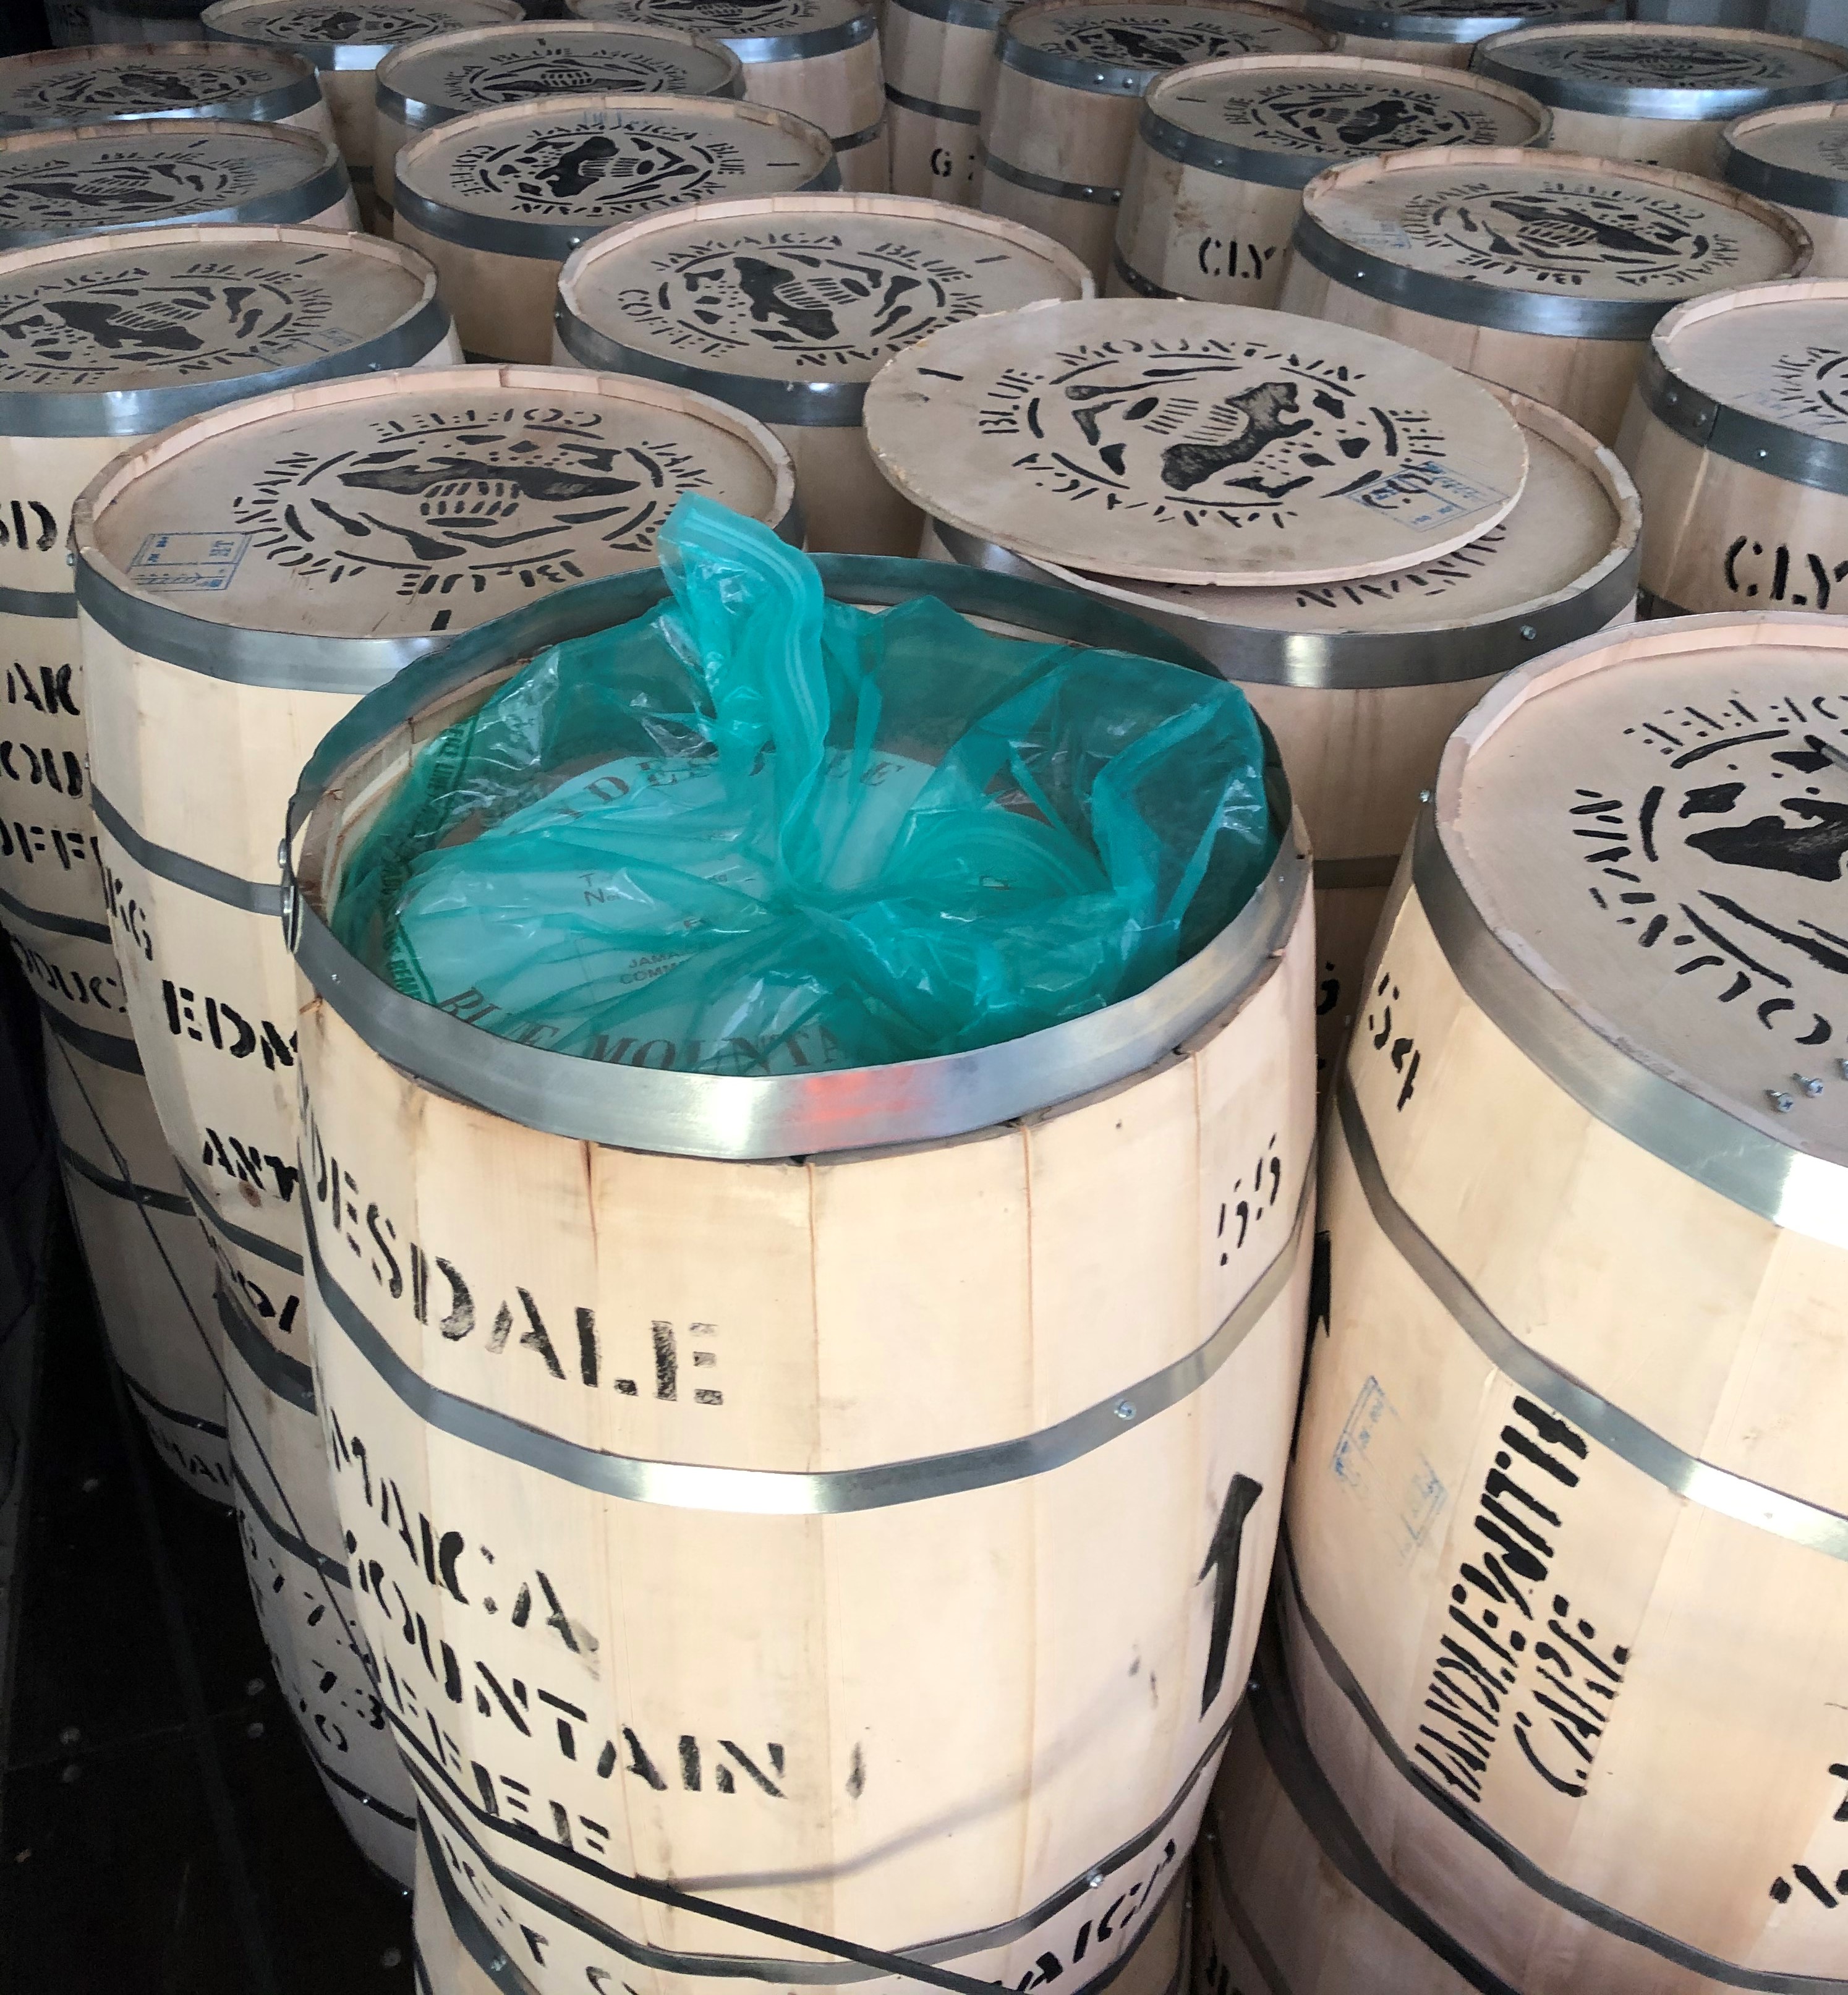 Barrels of Blue Mountain coffee beans